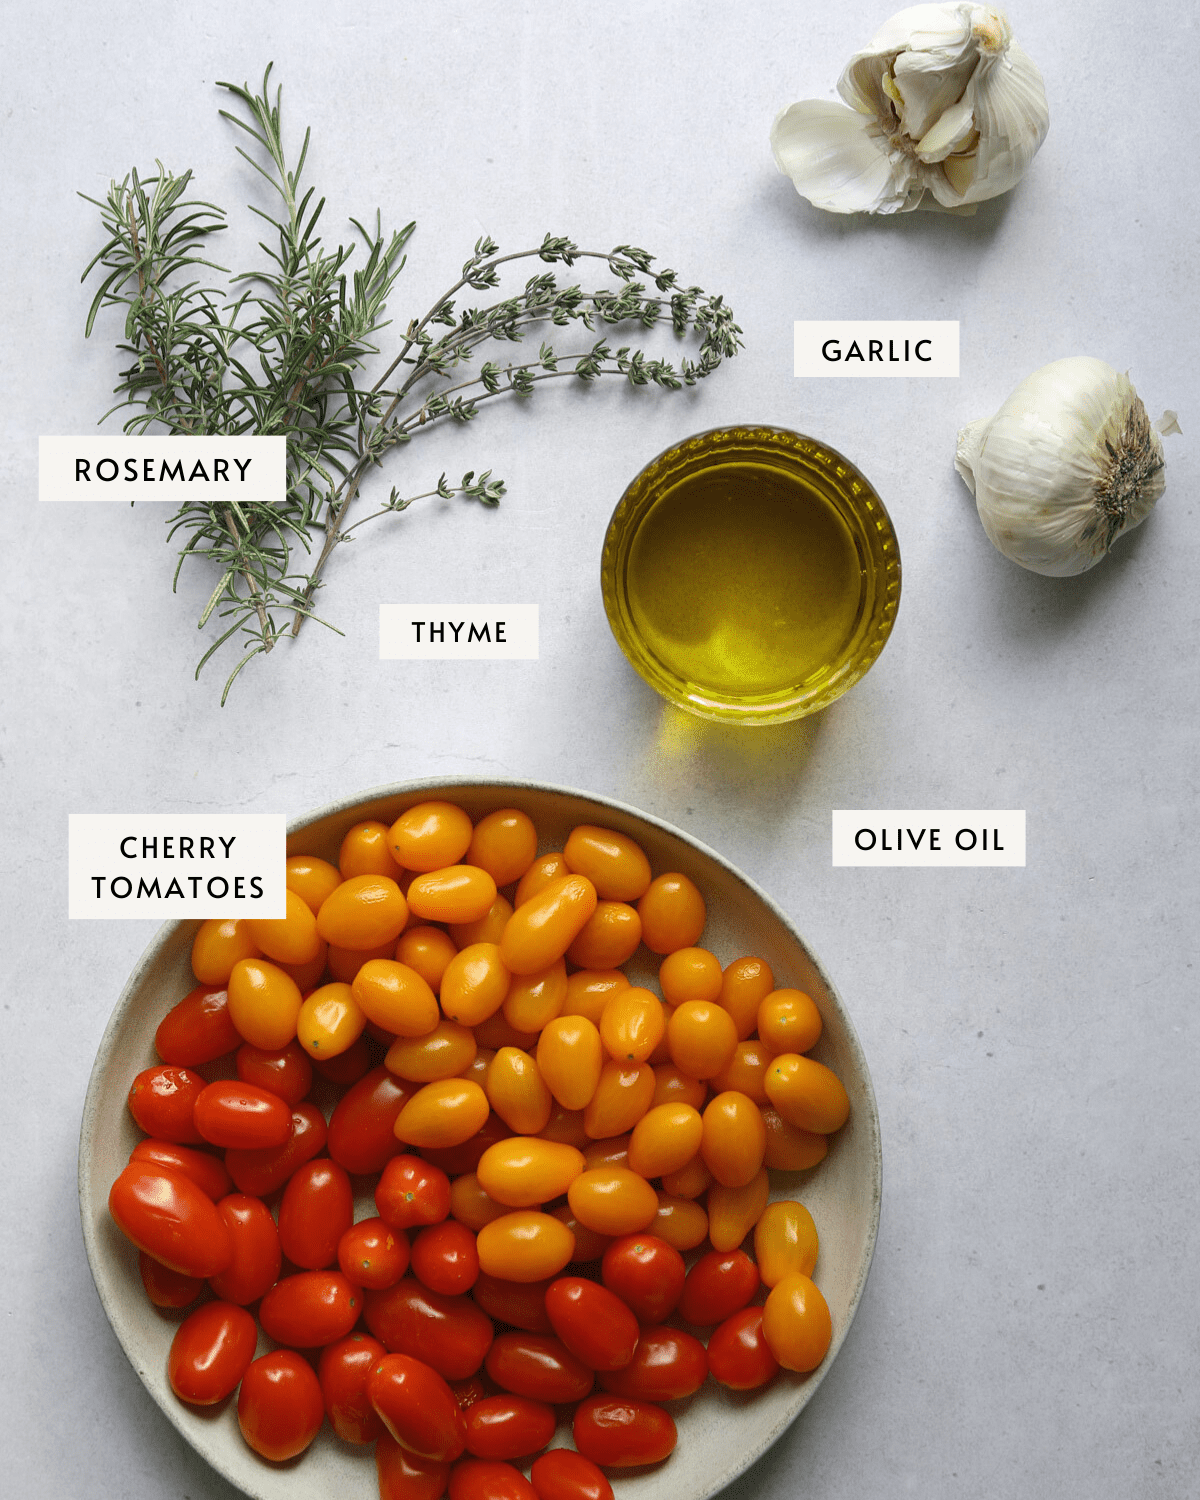 a bowl of yellow and red cherry tomatoes, fresh rosemary and thyme, garlic bulbs and olive oil